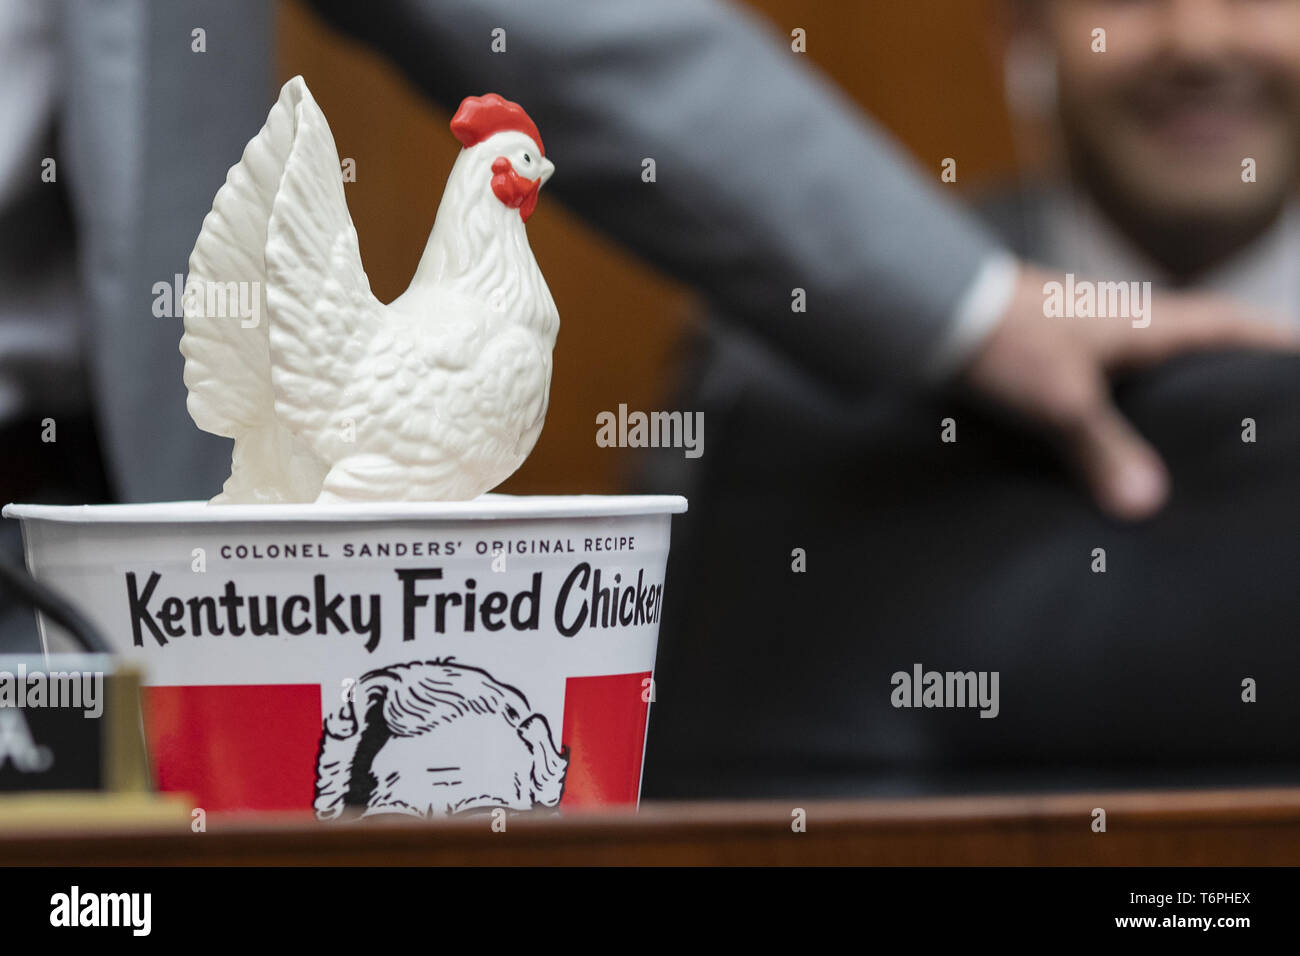 https://c8.alamy.com/comp/T6PHEX/washington-district-of-columbia-usa-2nd-may-2019-a-bucket-of-kentucky-fried-chicken-belonging-representative-steve-cohen-democrat-of-tennessee-sits-non-the-dais-prior-to-a-hearing-scheduled-for-attorney-general-william-barr-to-testify-about-the-mueller-report-before-the-united-states-house-or-representatives-judiciary-committee-on-capitol-hill-in-washington-dc-on-may-2-2019-credit-alex-edelmancnp-credit-alex-edelmancnpzuma-wirealamy-live-news-T6PHEX.jpg